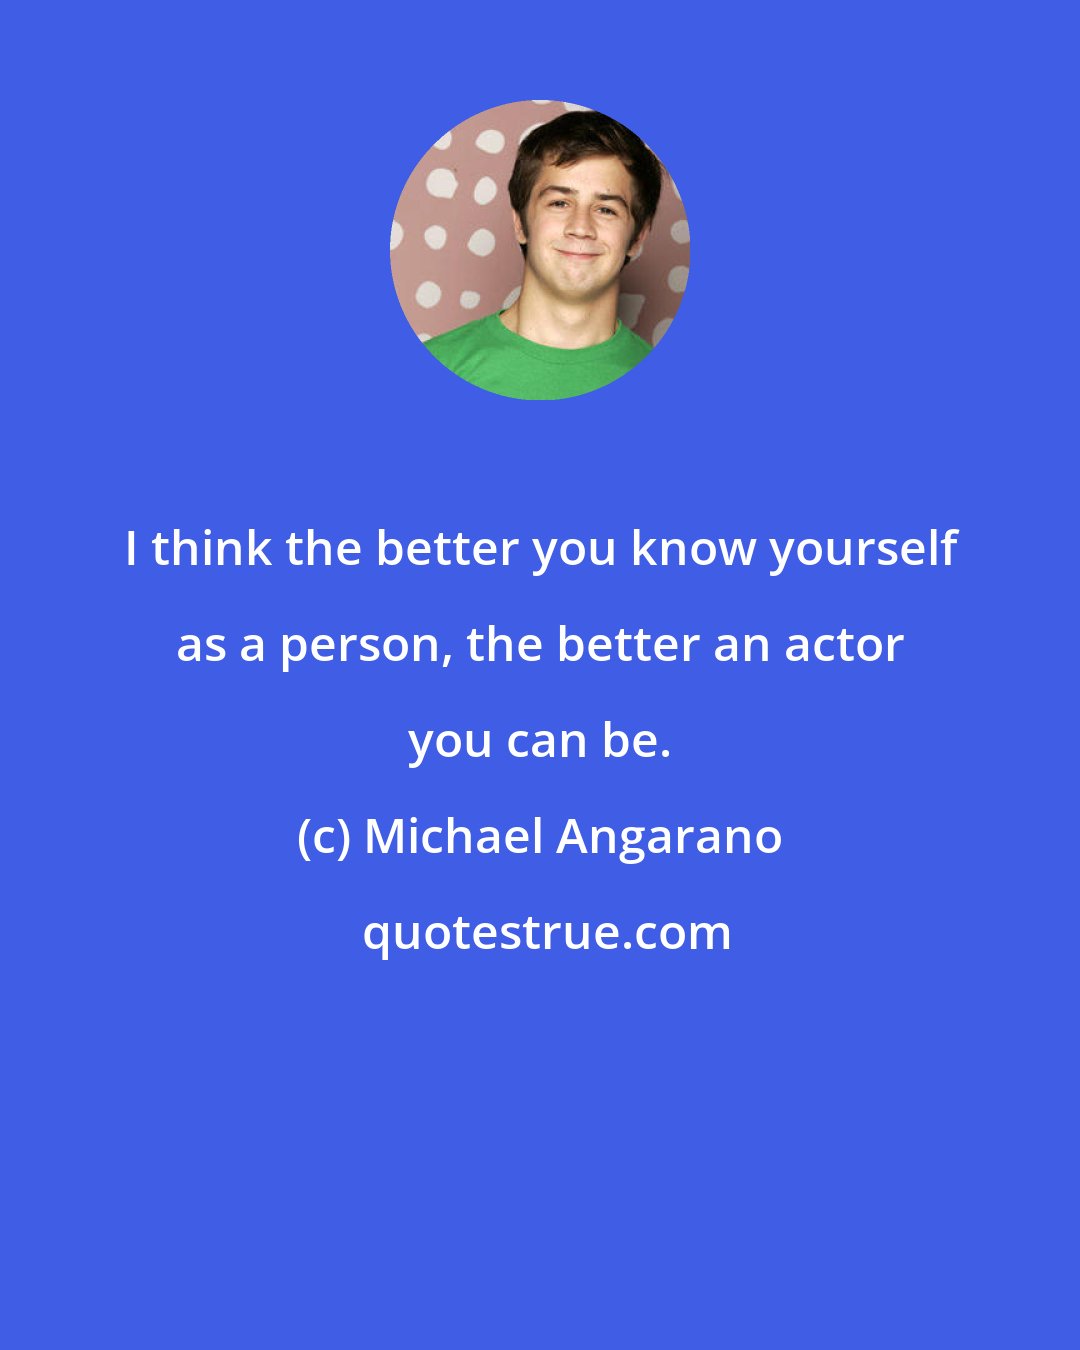 Michael Angarano: I think the better you know yourself as a person, the better an actor you can be.